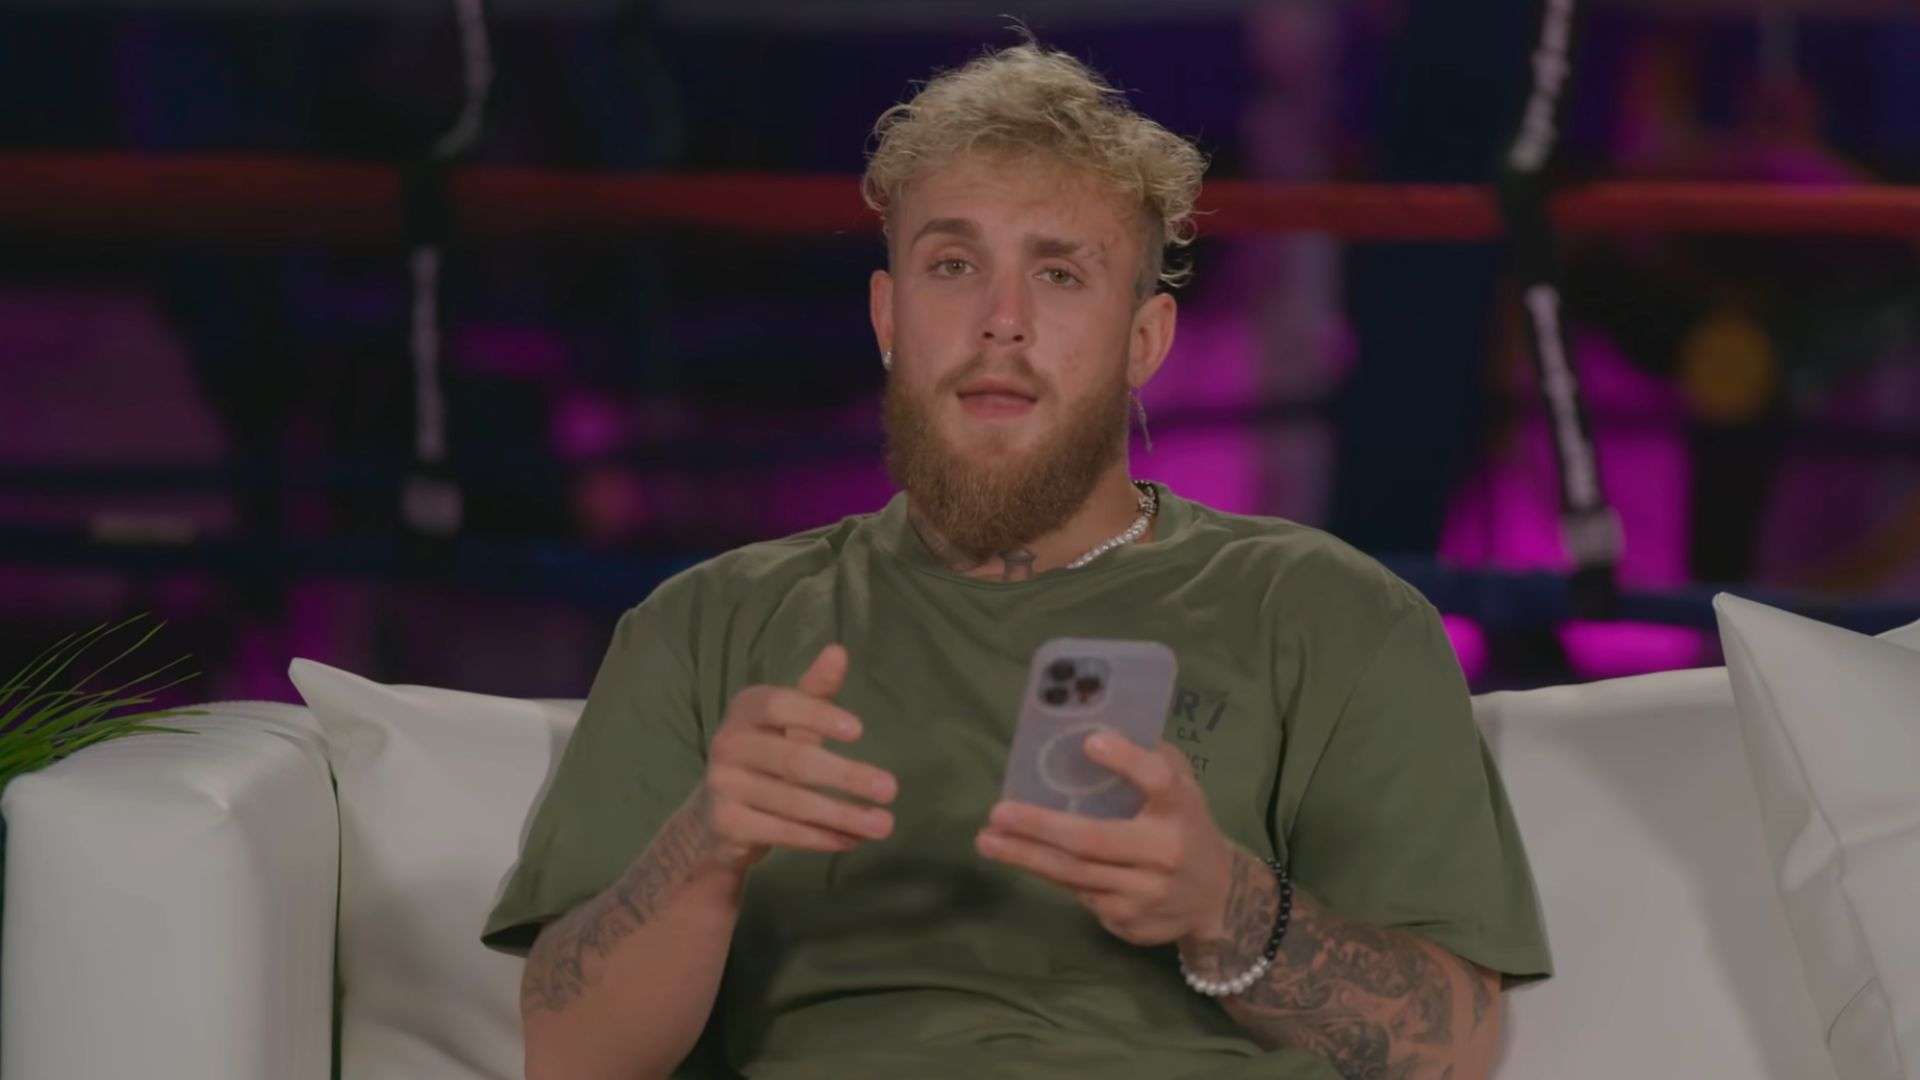 Jake Paul talking to camera with phone in hand on couch